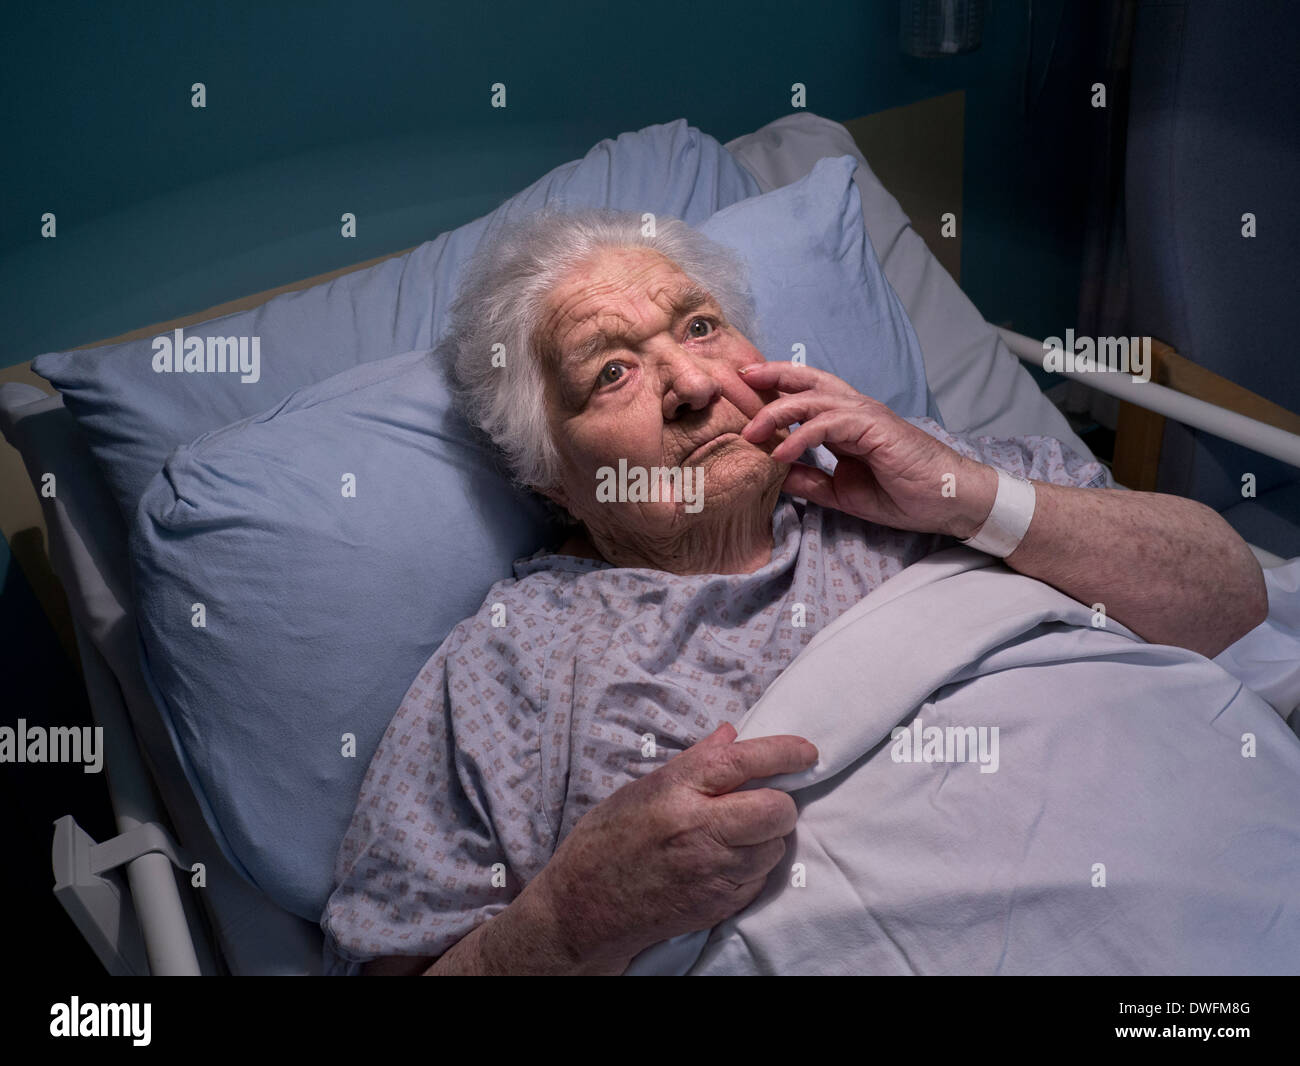 ELDERLY LADY MEMORY CARE HOSPITAL BED PENSIVE CONFUSED DEMENTIA  Very elderly lady at 100 years of age in thought in hospital care ward bed at night Stock Photo